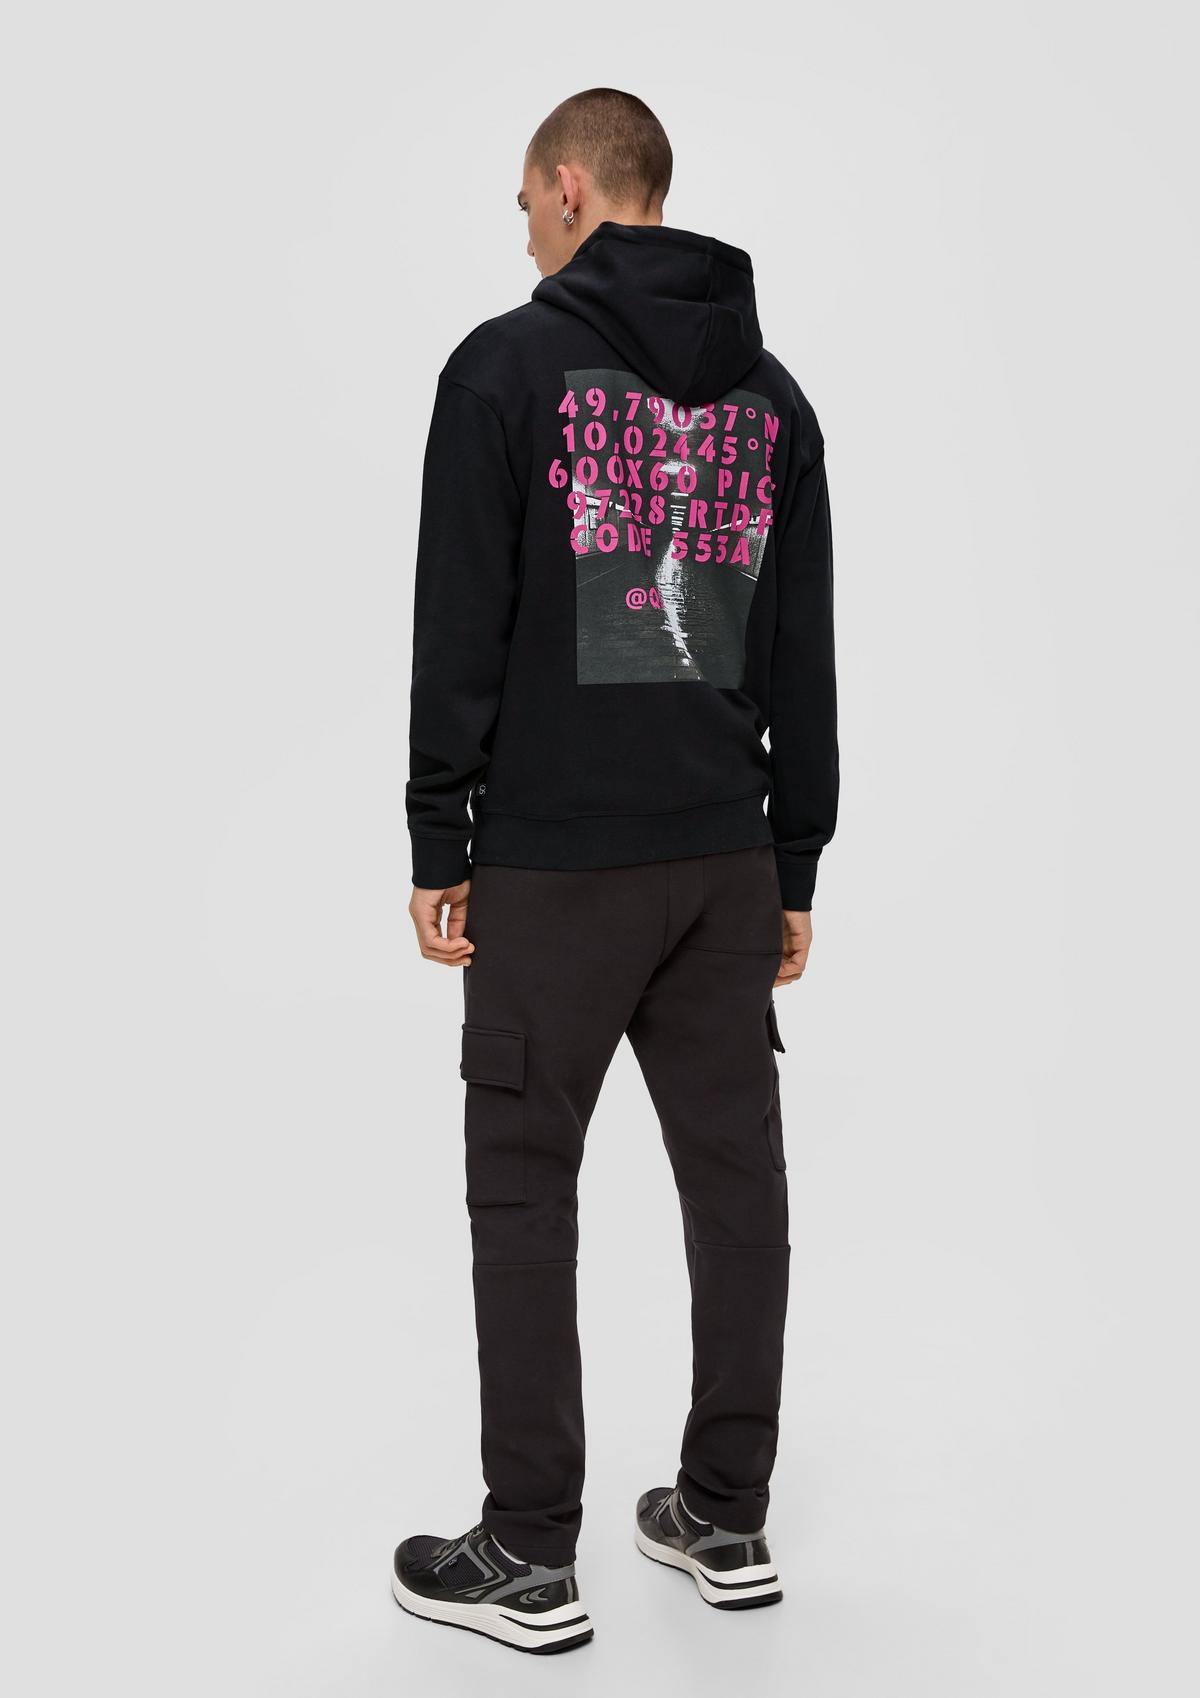 s.Oliver Sweatshirt with a front and back print